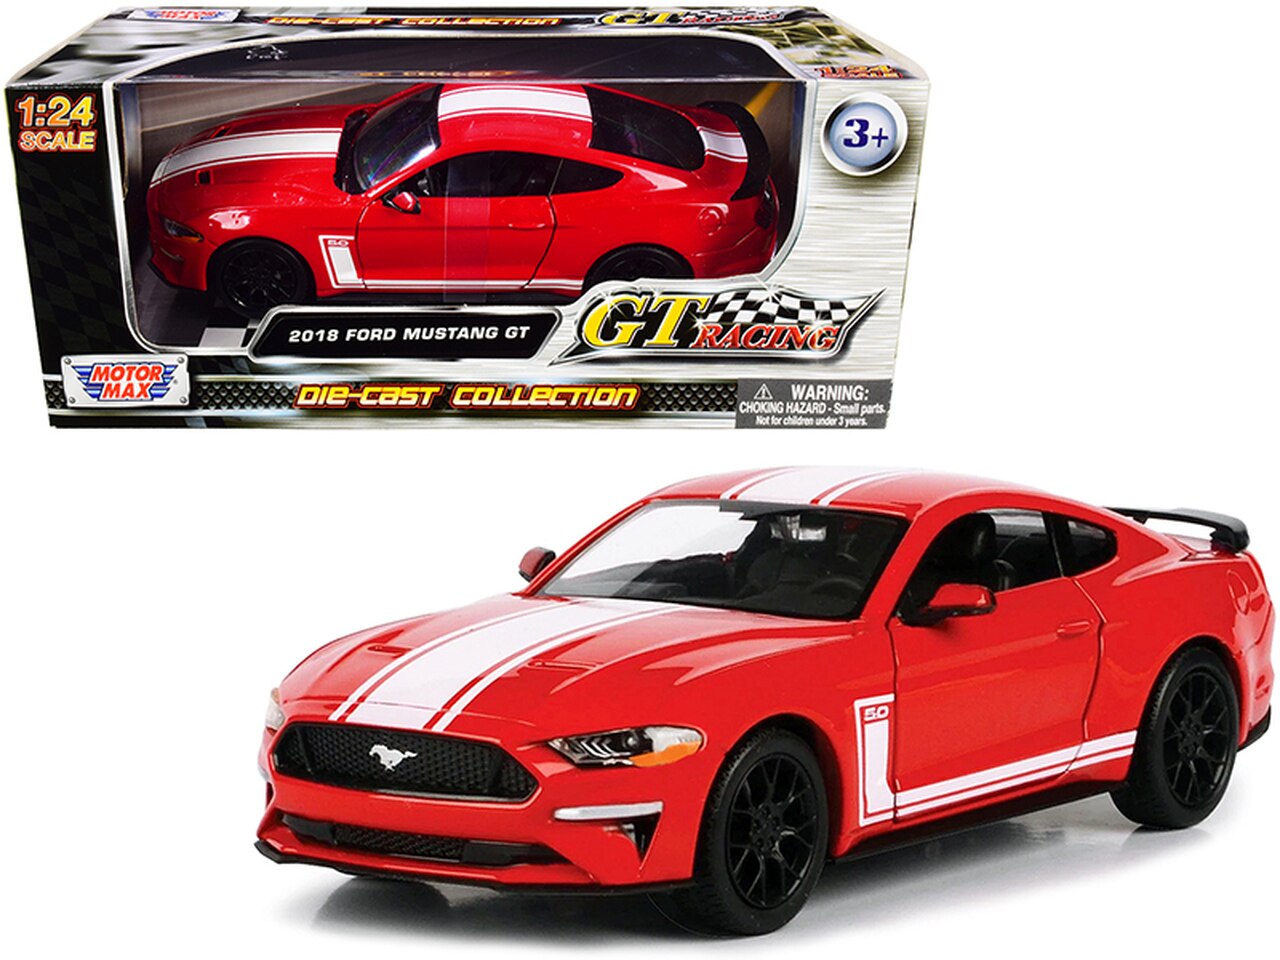 Ford Mustang GT Rouge Blanche 2018 Motormax 1-24 lulu shop